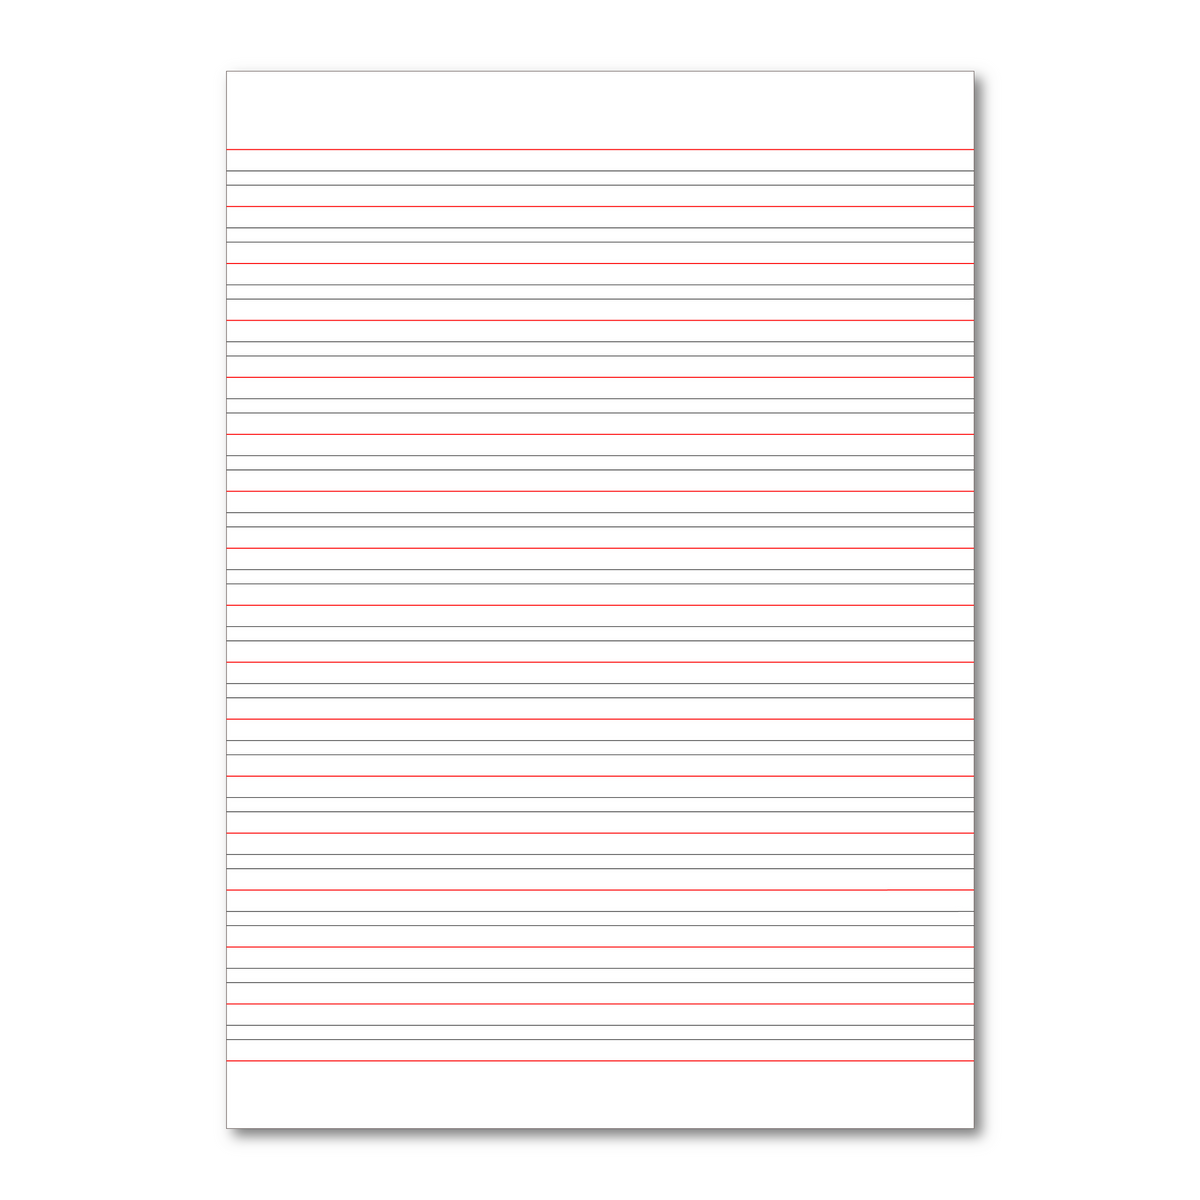 Manila School Handwriting Book A4 6mm Ruled and 21mm Intervals - Personalised